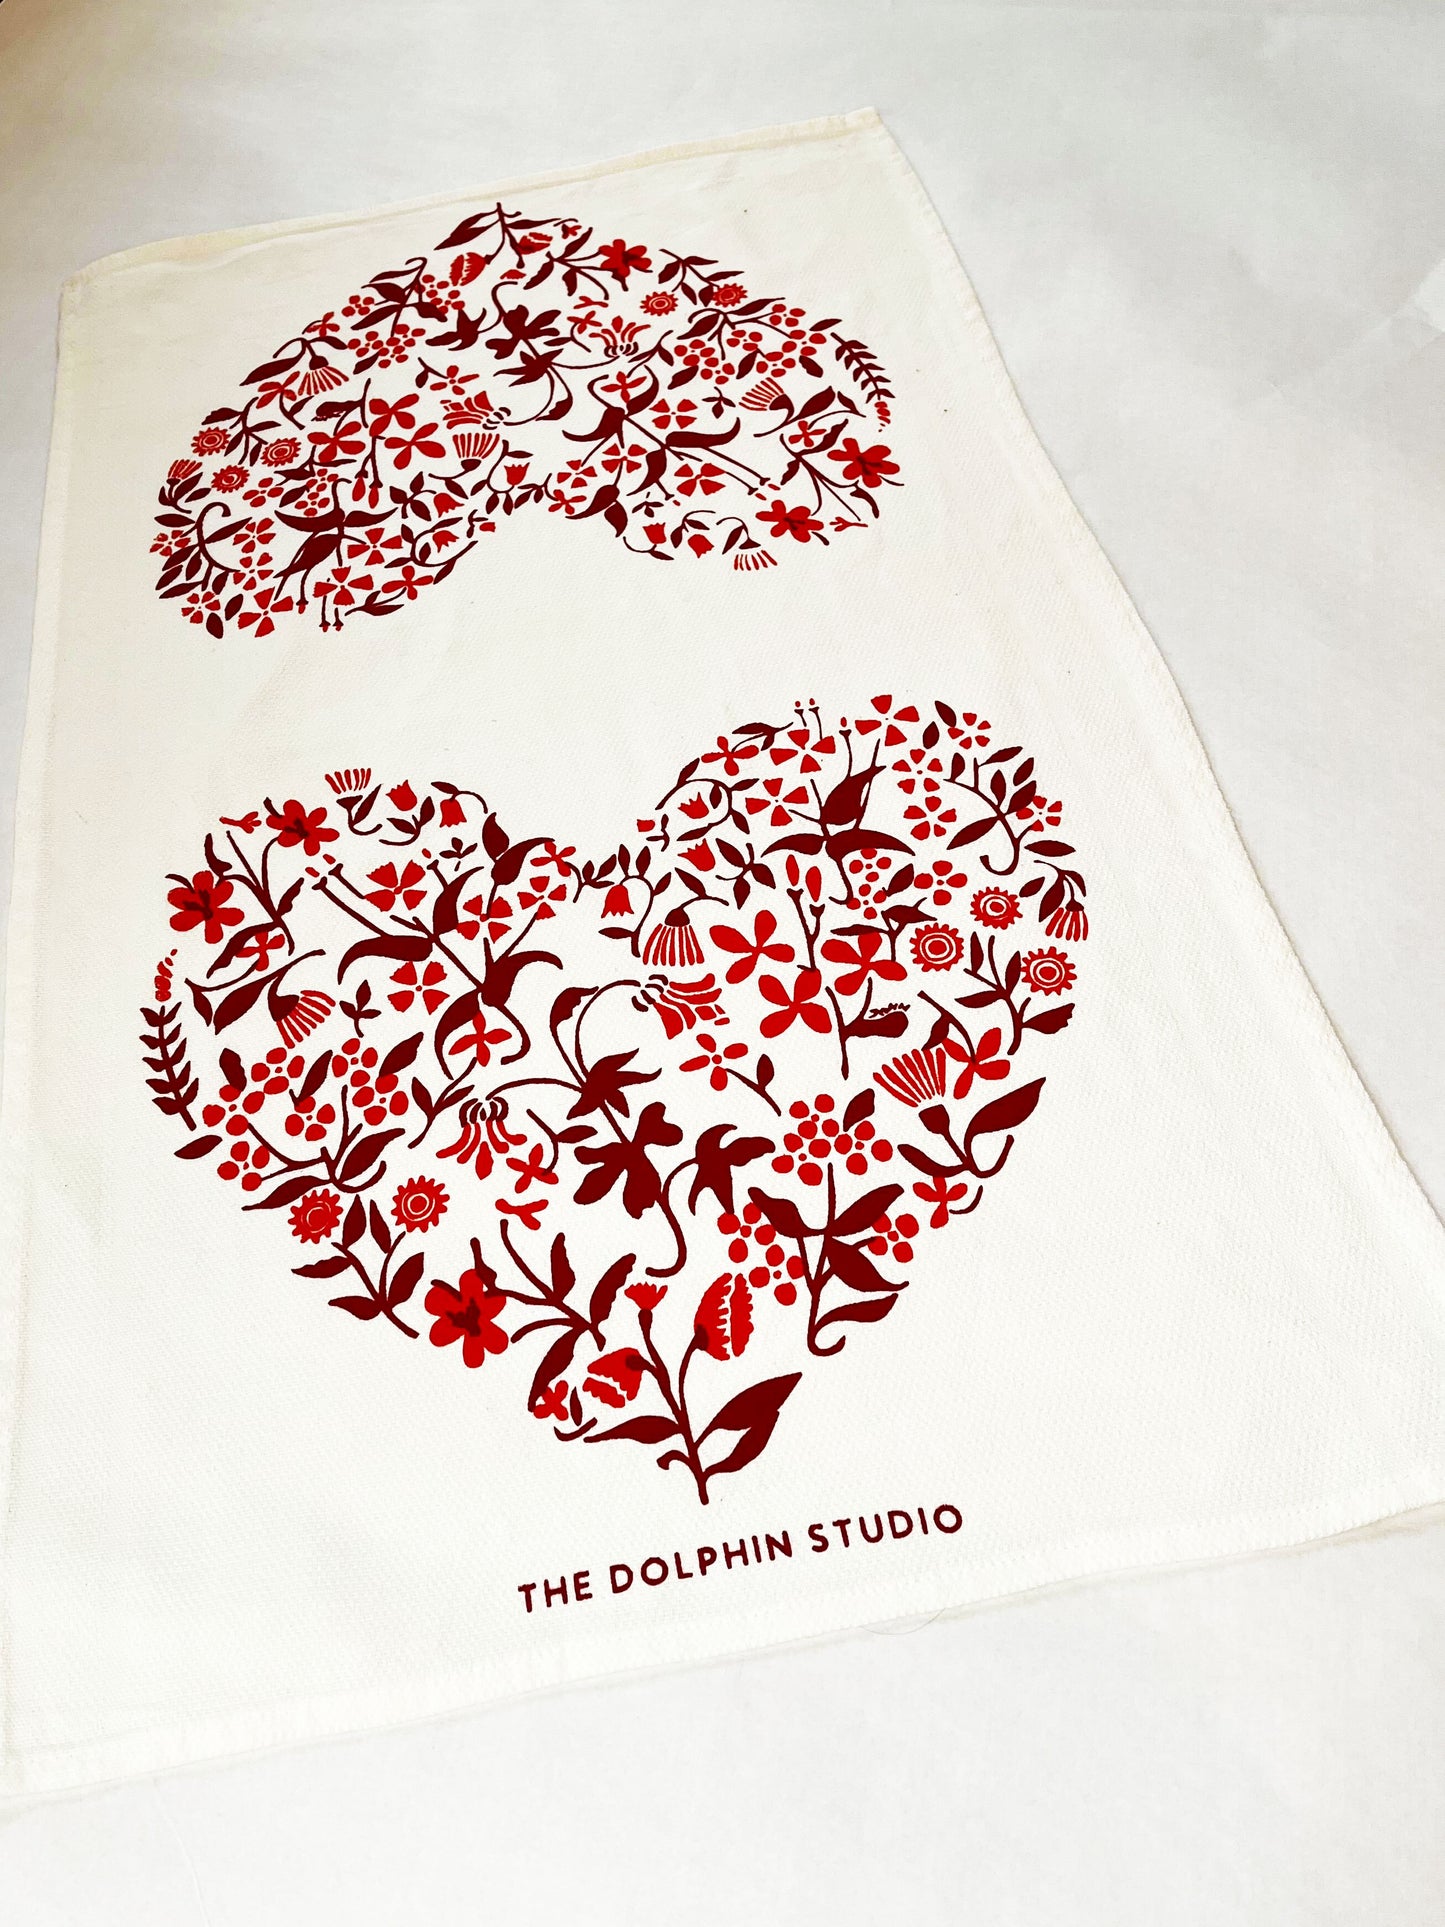 Kitchen Towels - FLORAL HEARTS